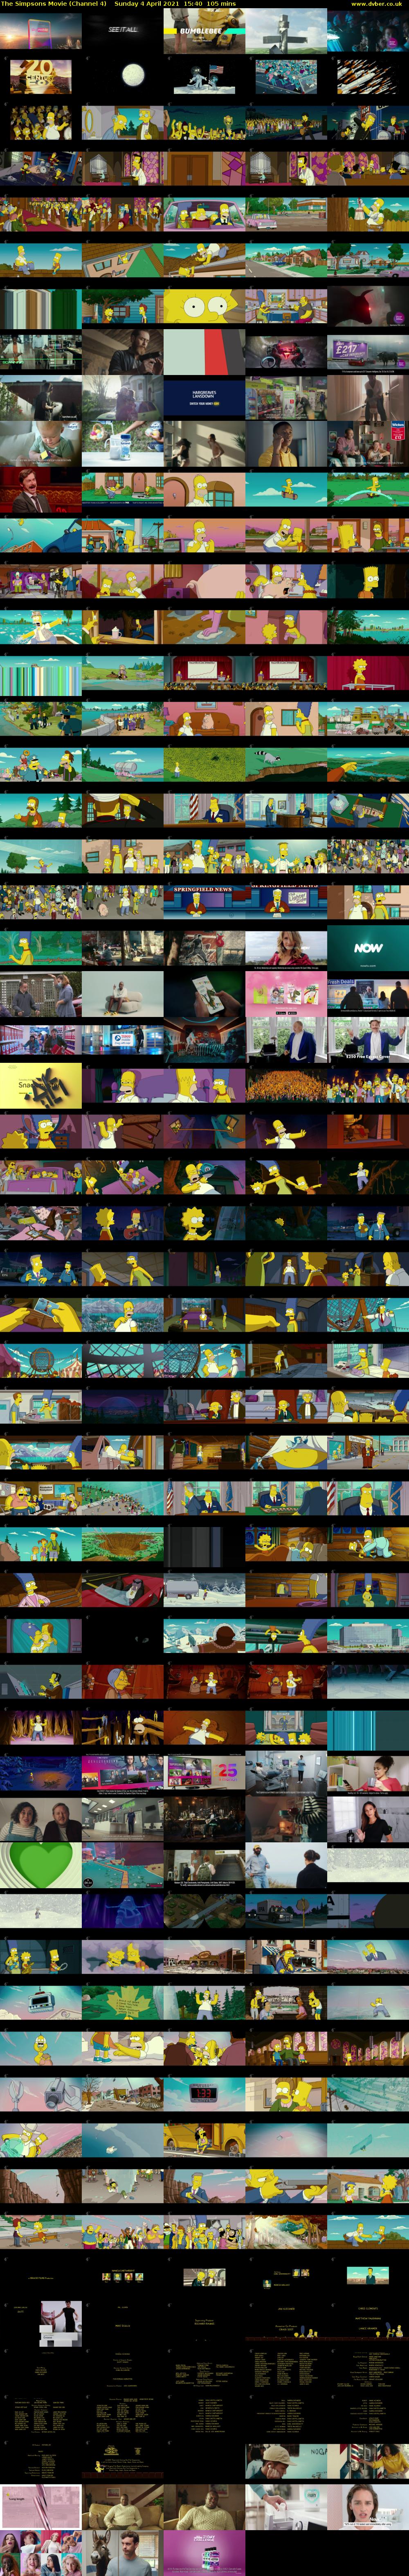 The Simpsons Movie (Channel 4) Sunday 4 April 2021 15:40 - 17:25